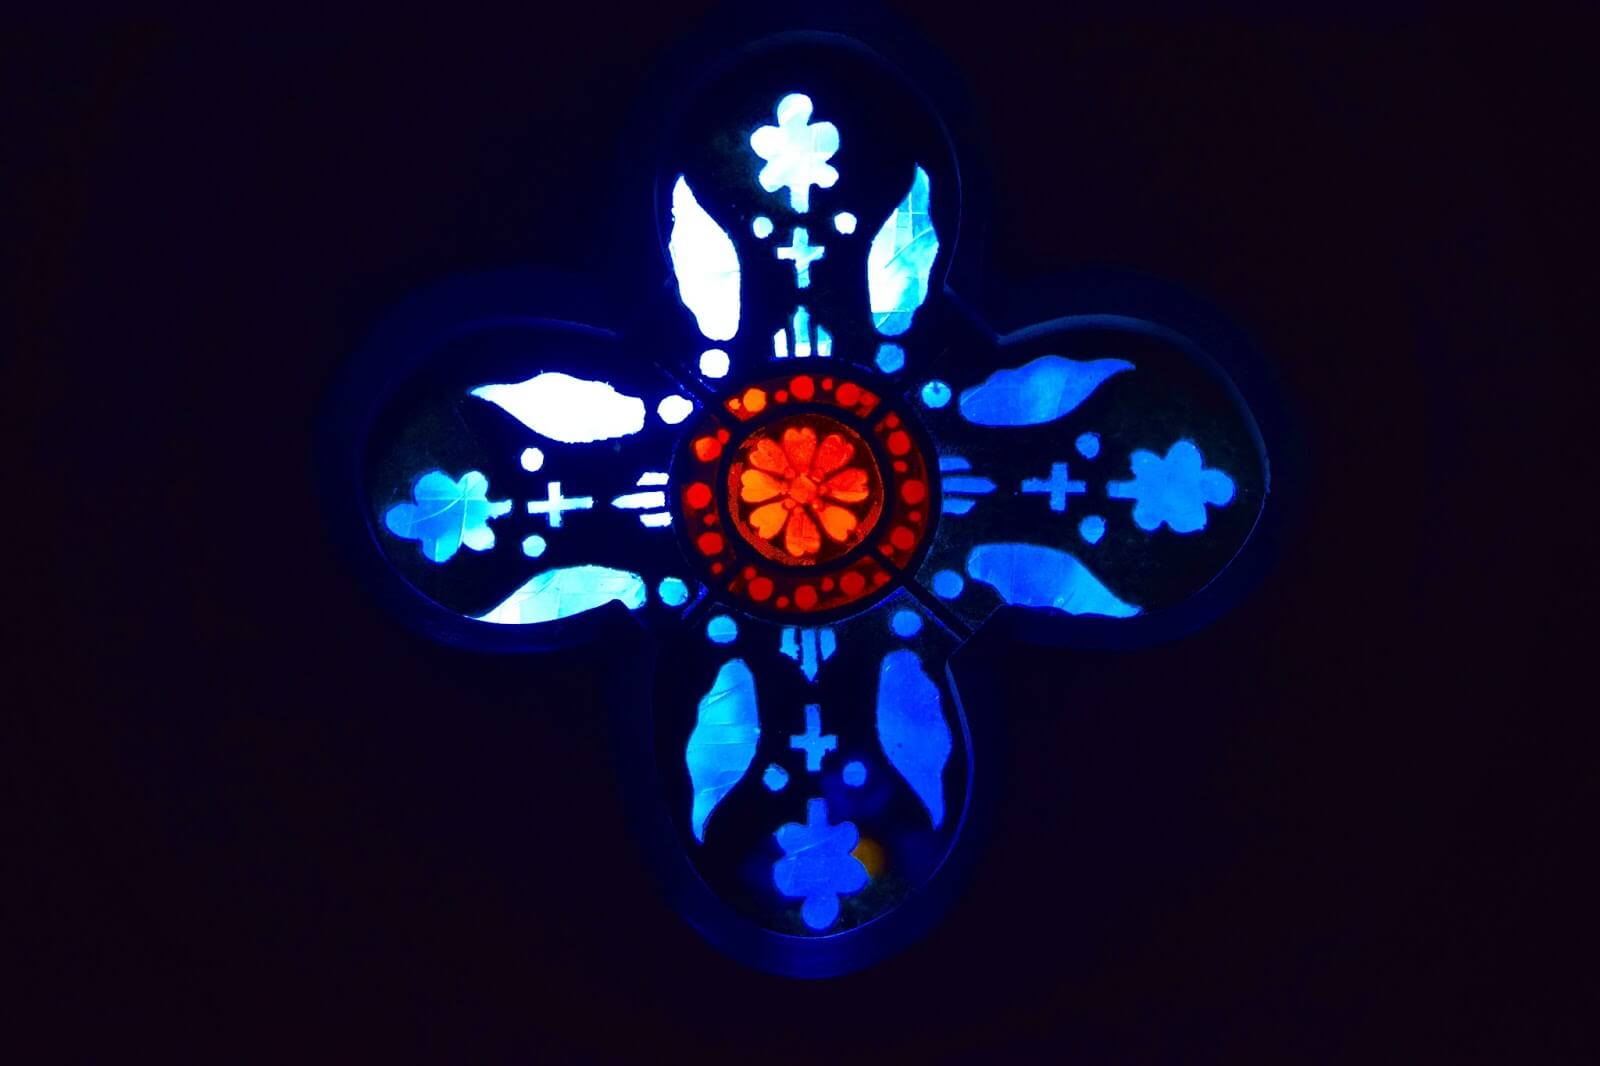 Quatrefoil stained glass with a red core surrounded by blue.